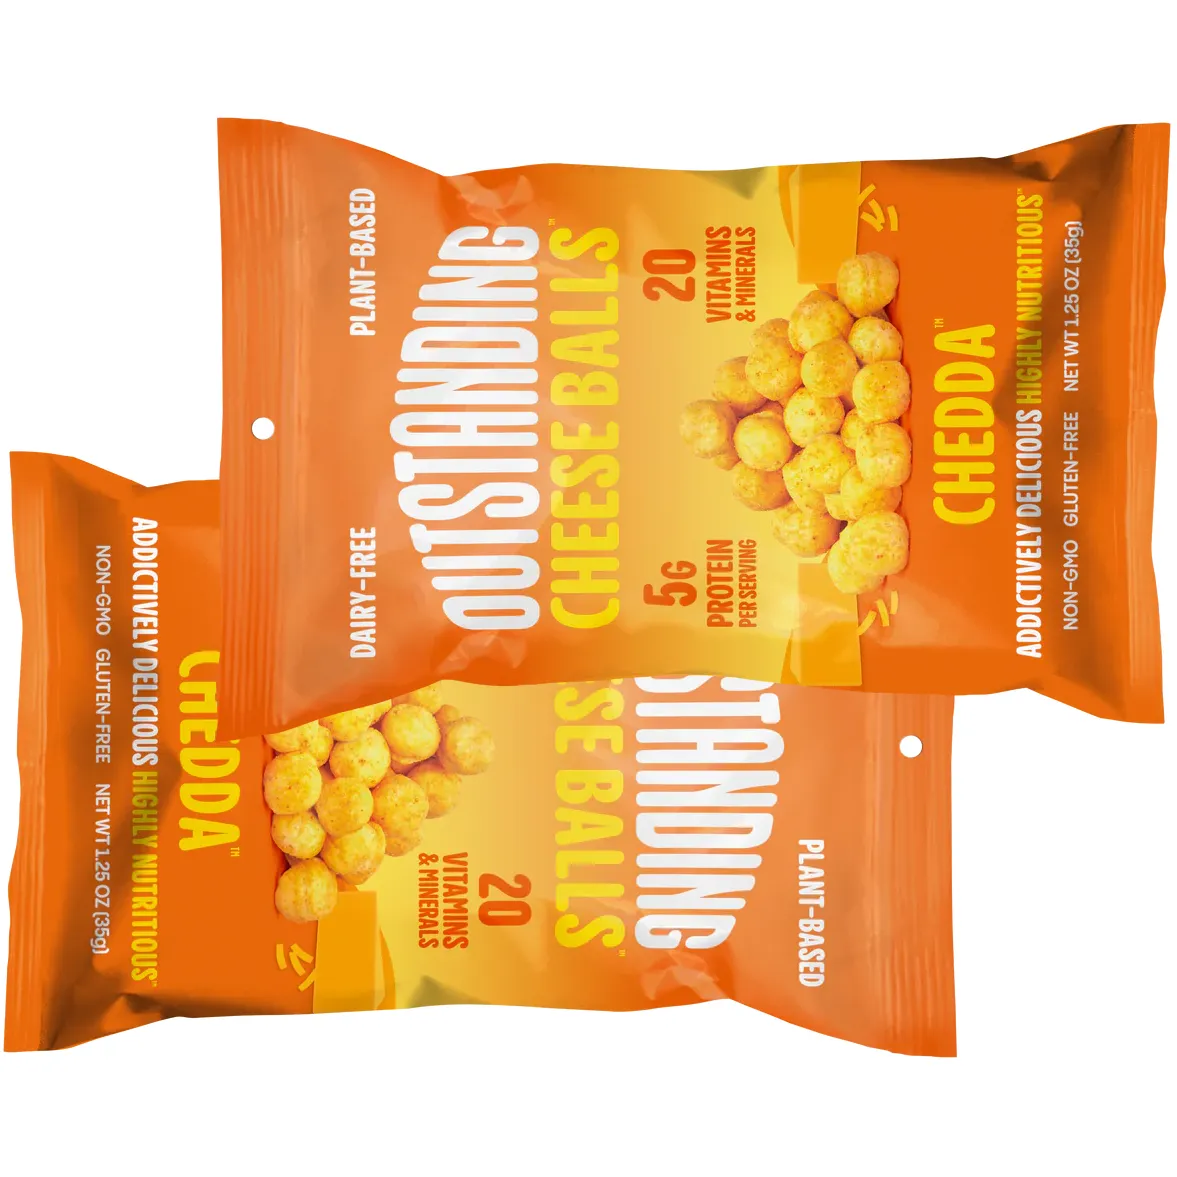 Free Outstanding Foods Chedda Cheese Balls